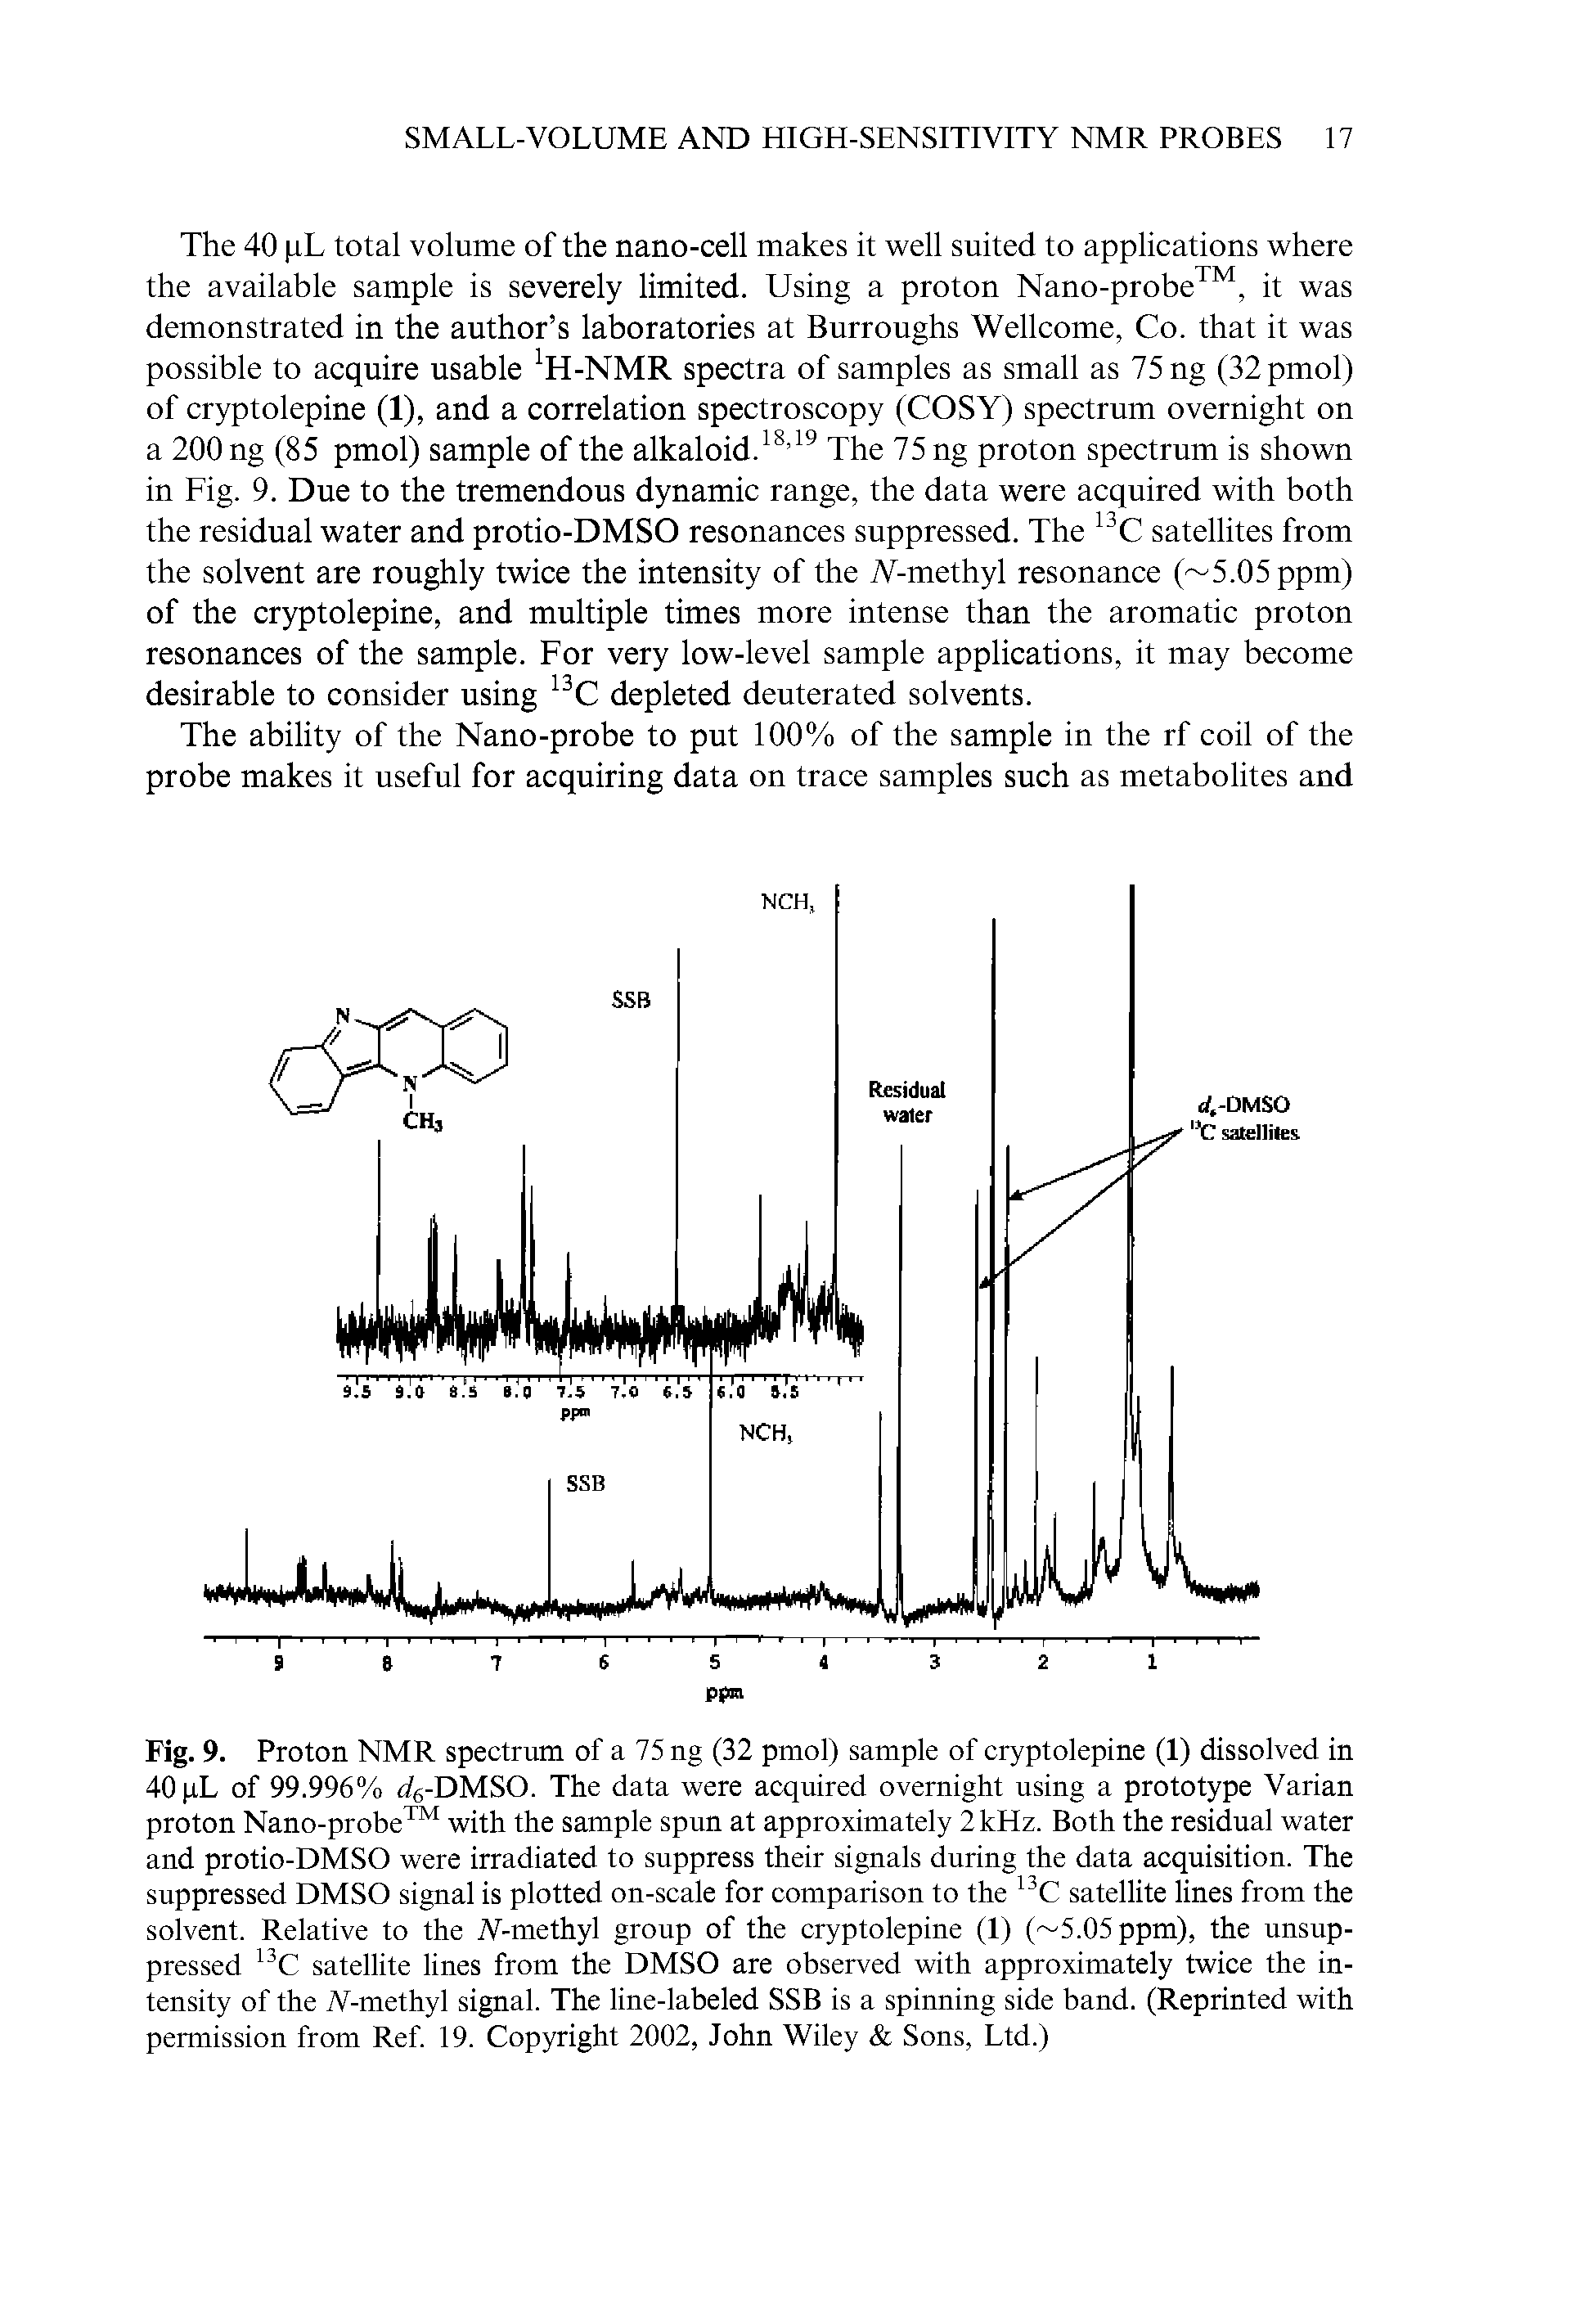 Fig. 9. Proton NMR spectrum of a 75 ng (32 pmol) sample of cryptolepine (1) dissolved in 40 pL of 99.996% d6-DMSO. The data were acquired overnight using a prototype Varian proton Nano-probe with the sample spun at approximately 2 kHz. Both the residual water and protio-DMSO were irradiated to suppress their signals during the data acquisition. The suppressed DMSO signal is plotted on-scale for comparison to the 13C satellite lines from the solvent. Relative to the V-methyl group of the cryptolepine (1) ( 5.05ppm), the unsuppressed 13C satellite lines from the DMSO are observed with approximately twice the intensity of the Y-methyl signal. The line-labeled SSB is a spinning side band. (Reprinted with permission from Ref. 19. Copyright 2002, John Wiley Sons, Ltd.)...